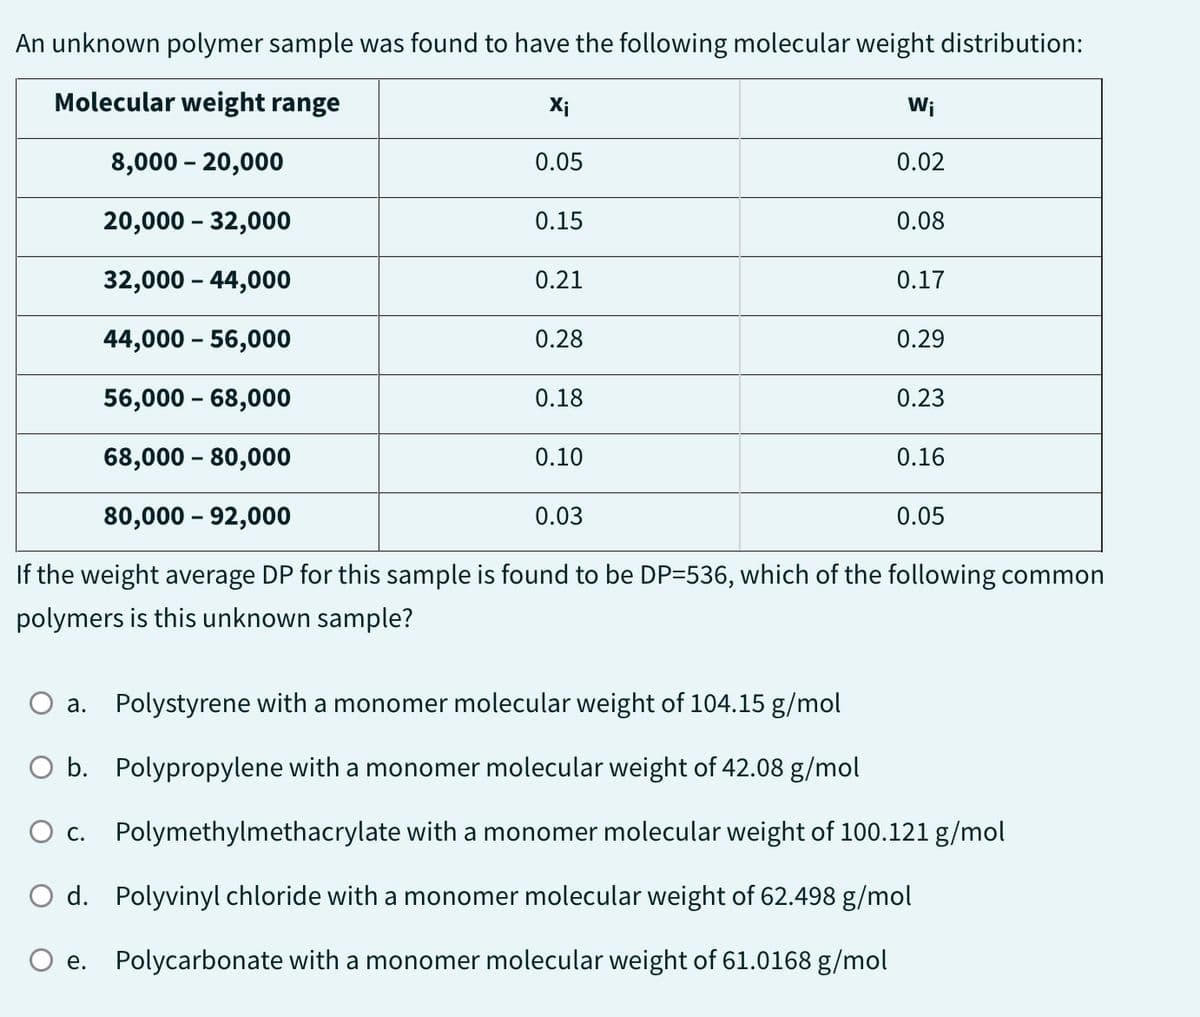 An unknown polymer sample was found to have the following molecular weight distribution:
Molecular weight range
8,000 - 20,000
Xi
0.05
0.15
0.21
20,000 - 32,000
32,000 - 44,000
44,000 - 56,000
56,000 - 68,000
68,000 - 80,000
80,000 - 92,000
If the weight average DP for this sample is found to be DP=536, which of the following common
polymers is this unknown sample?
0.28
0.18
0.10
Wi
0.03
0.02
0.08
0.17
0.29
0.23
0.16
0.05
O a.
Polystyrene with a monomer molecular weight of 104.15 g/mol
O b.
Polypropylene with a monomer molecular weight of 42.08 g/mol
O c.
Polymethylmethacrylate with a monomer molecular weight of 100.121 g/mol
O d. Polyvinyl chloride with a monomer molecular weight of 62.498 g/mol
e.
Polycarbonate with a monomer molecular weight of 61.0168 g/mol